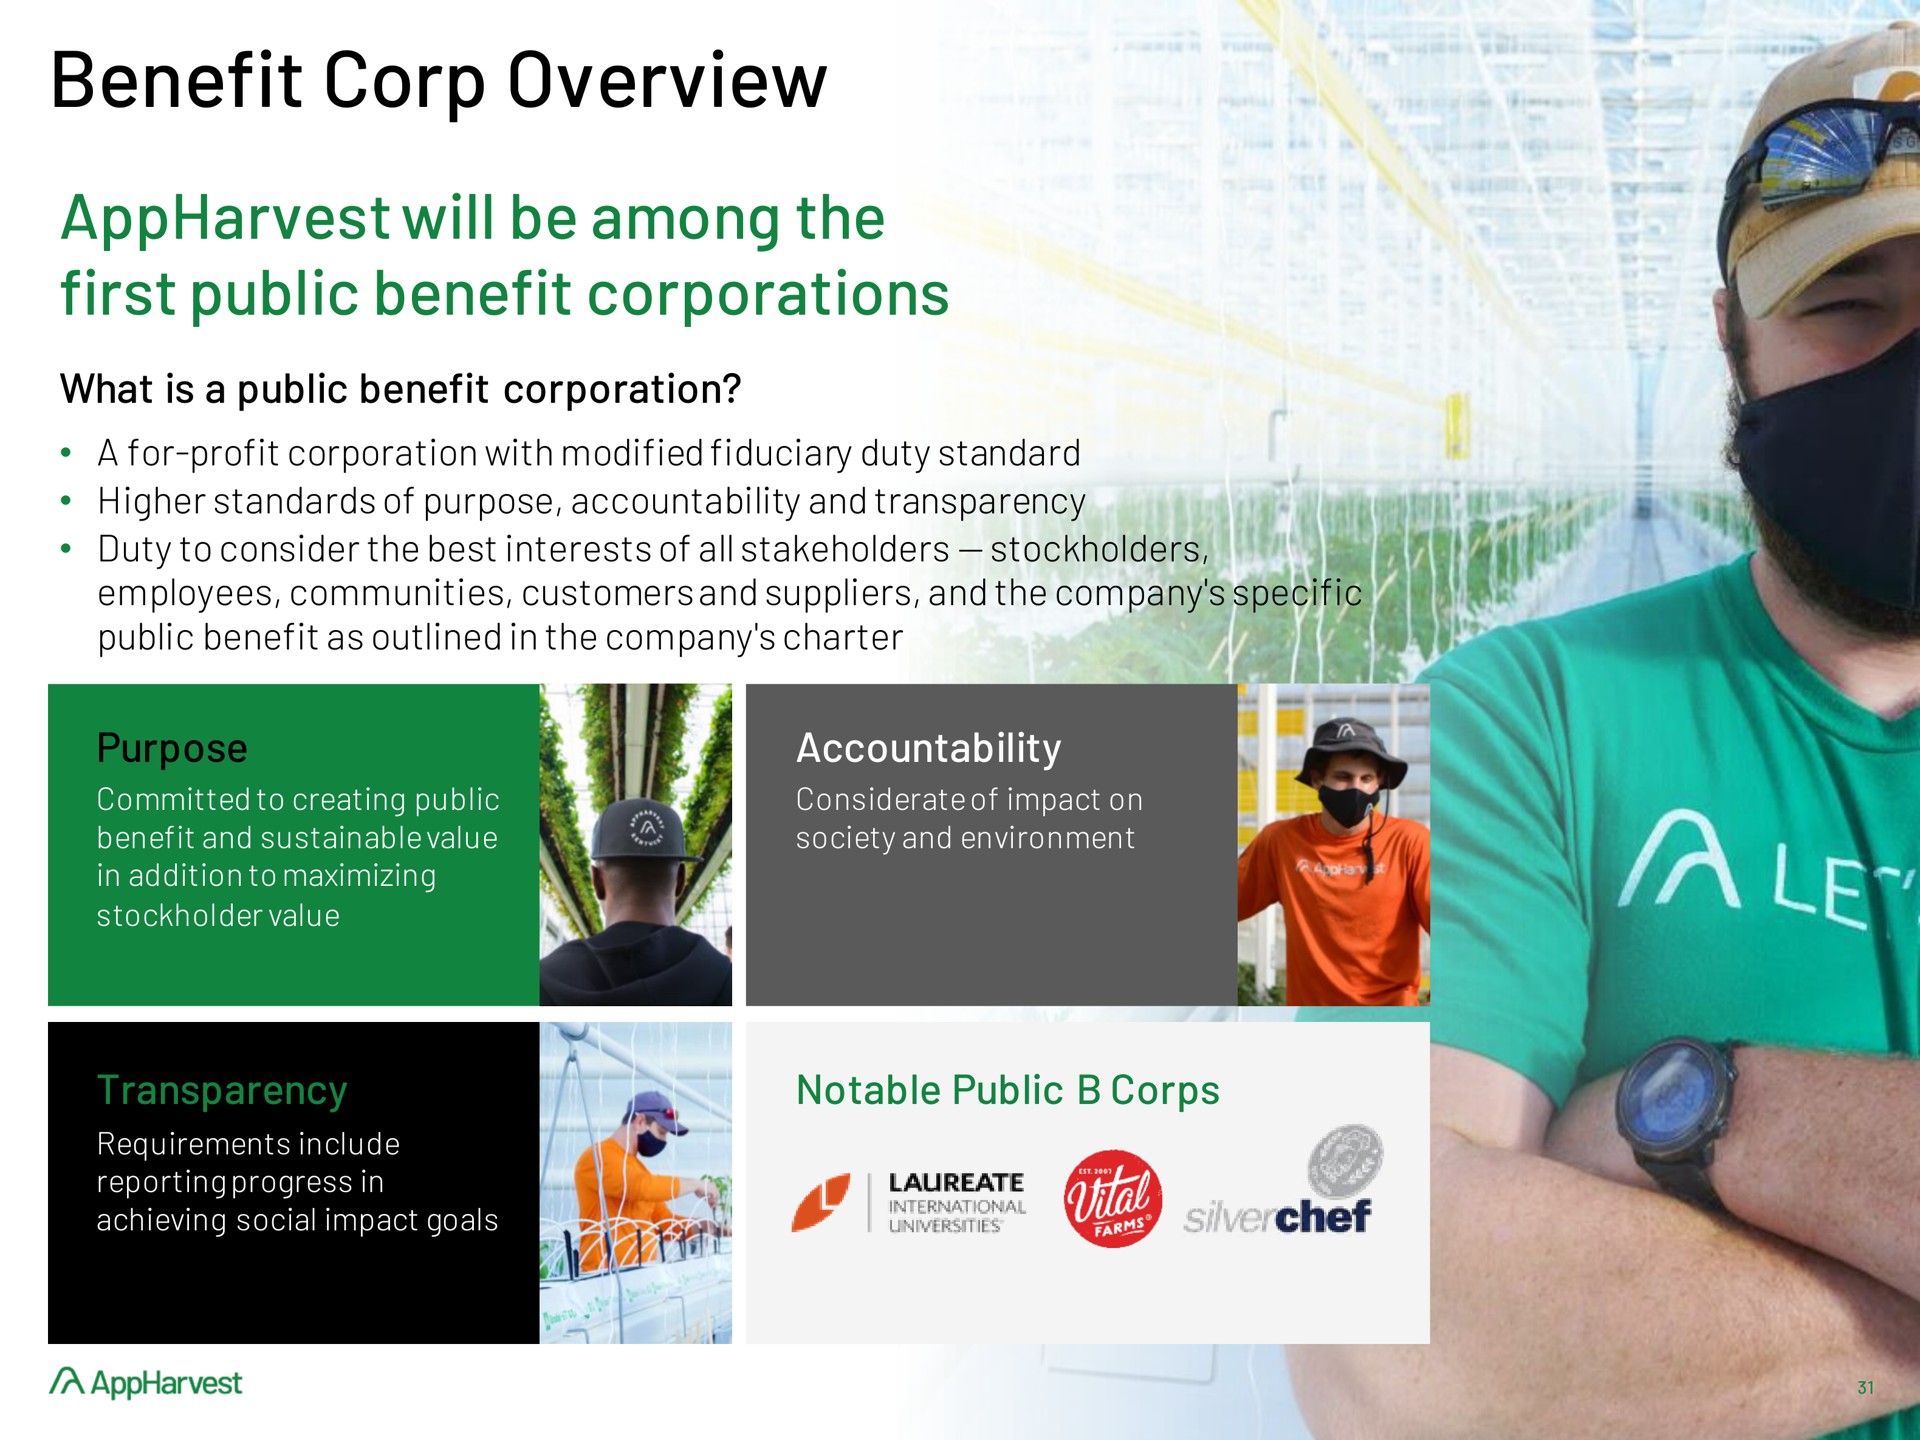 benefit corp overview will be among the first public benefit corporations | AppHarvest